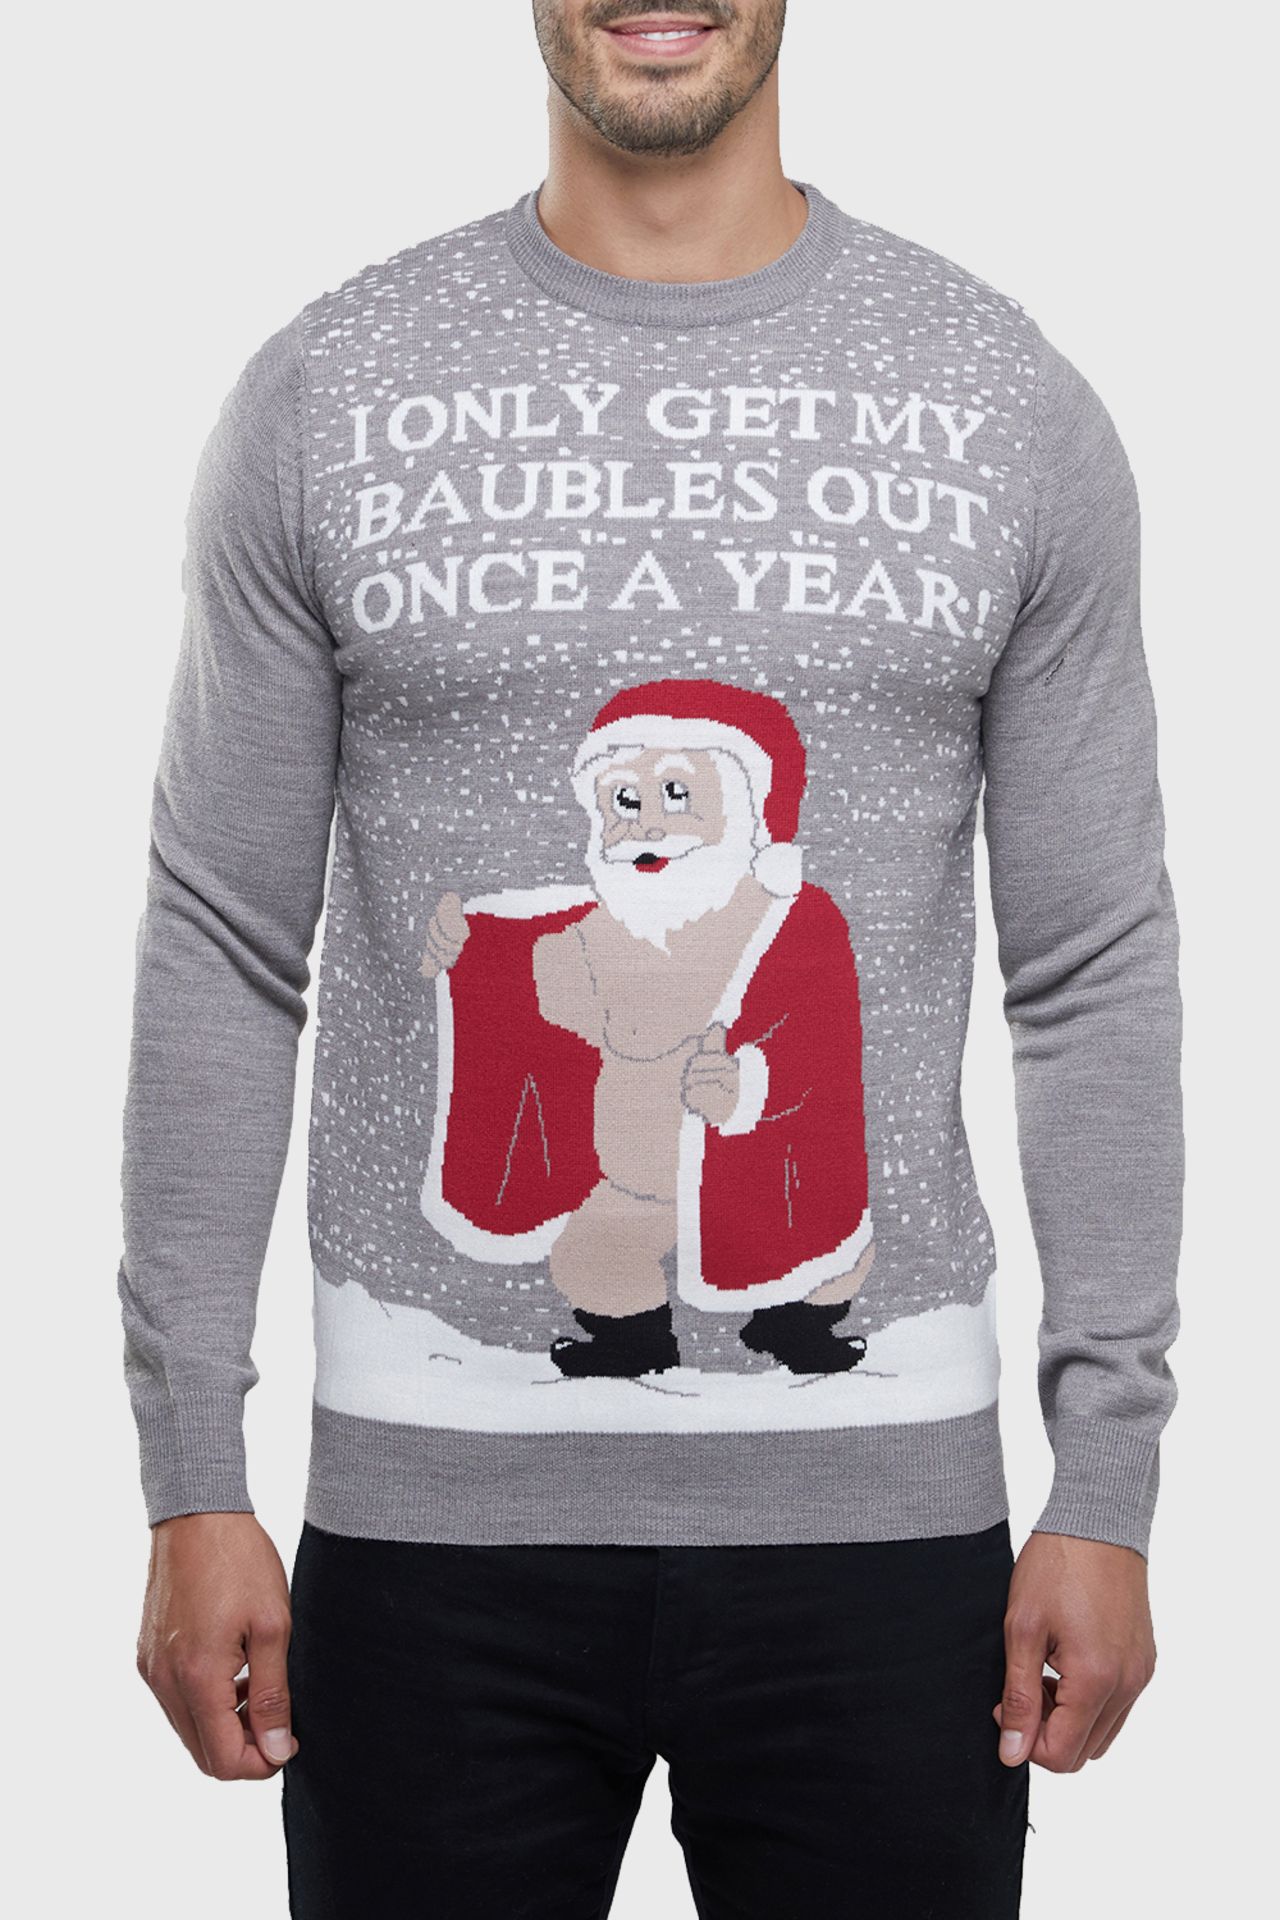 36 X BRAND NEW NOVELTY FESTIVE JUMPERS IE. THE GREATEST SNOWMAN (L-10), NAUGHTY SANTA GREY (M-5, S- - Image 2 of 4